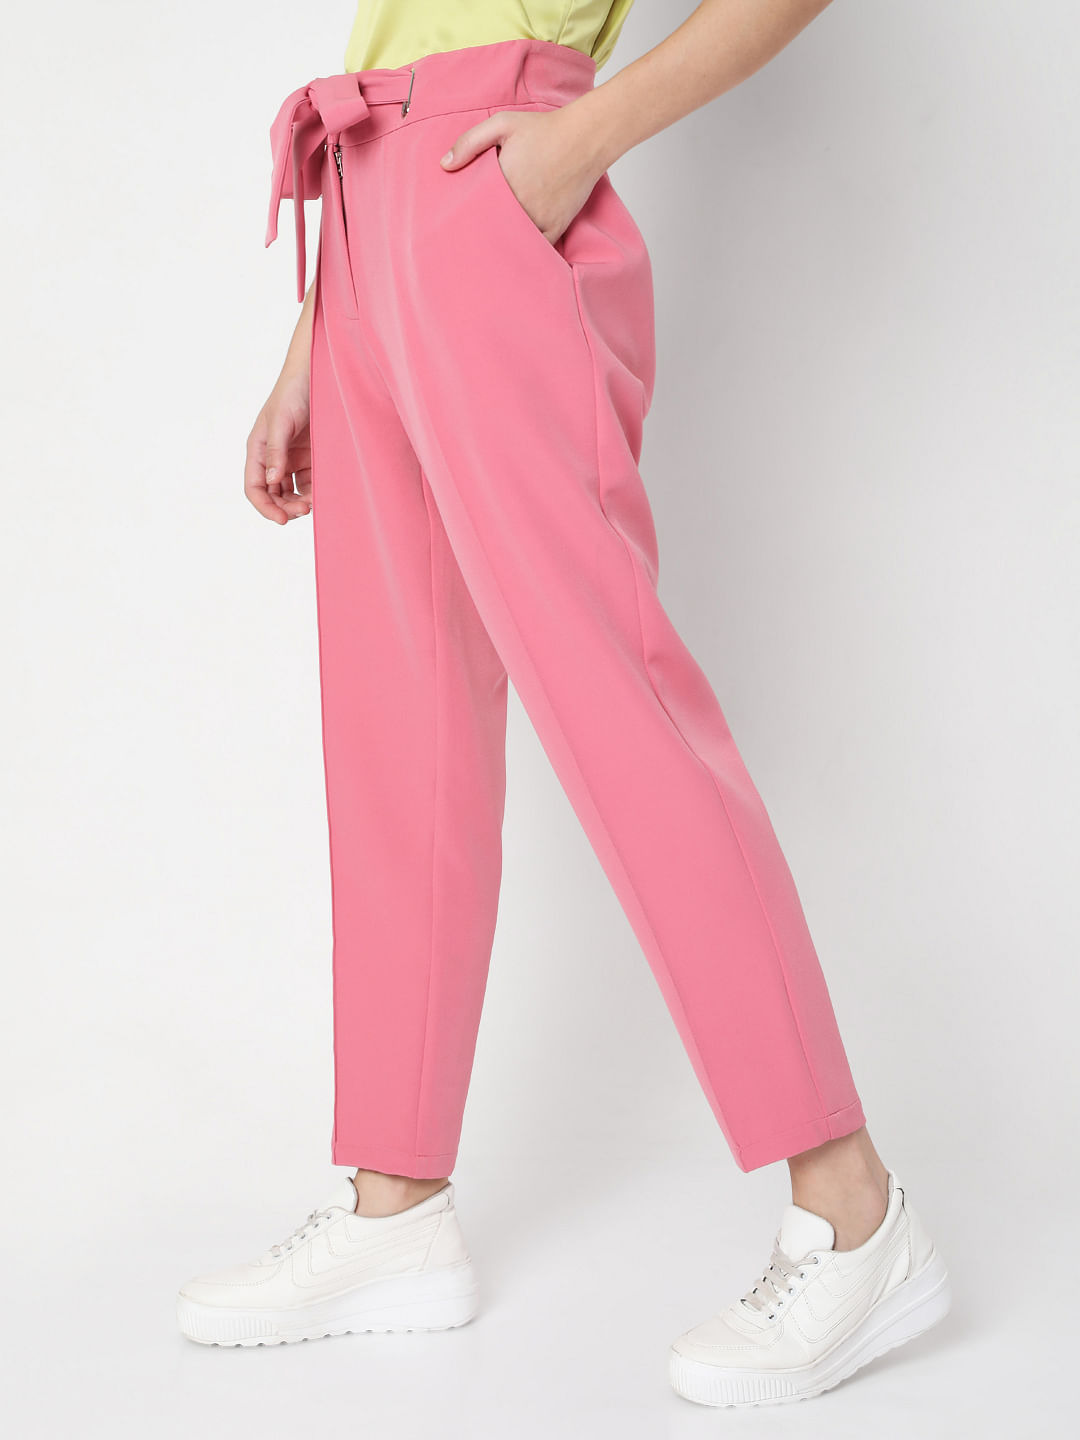 Zara light pink high waisted pants/trousers bloggers favorite | Pink  trousers outfit, Fancy outfits, High waisted pants